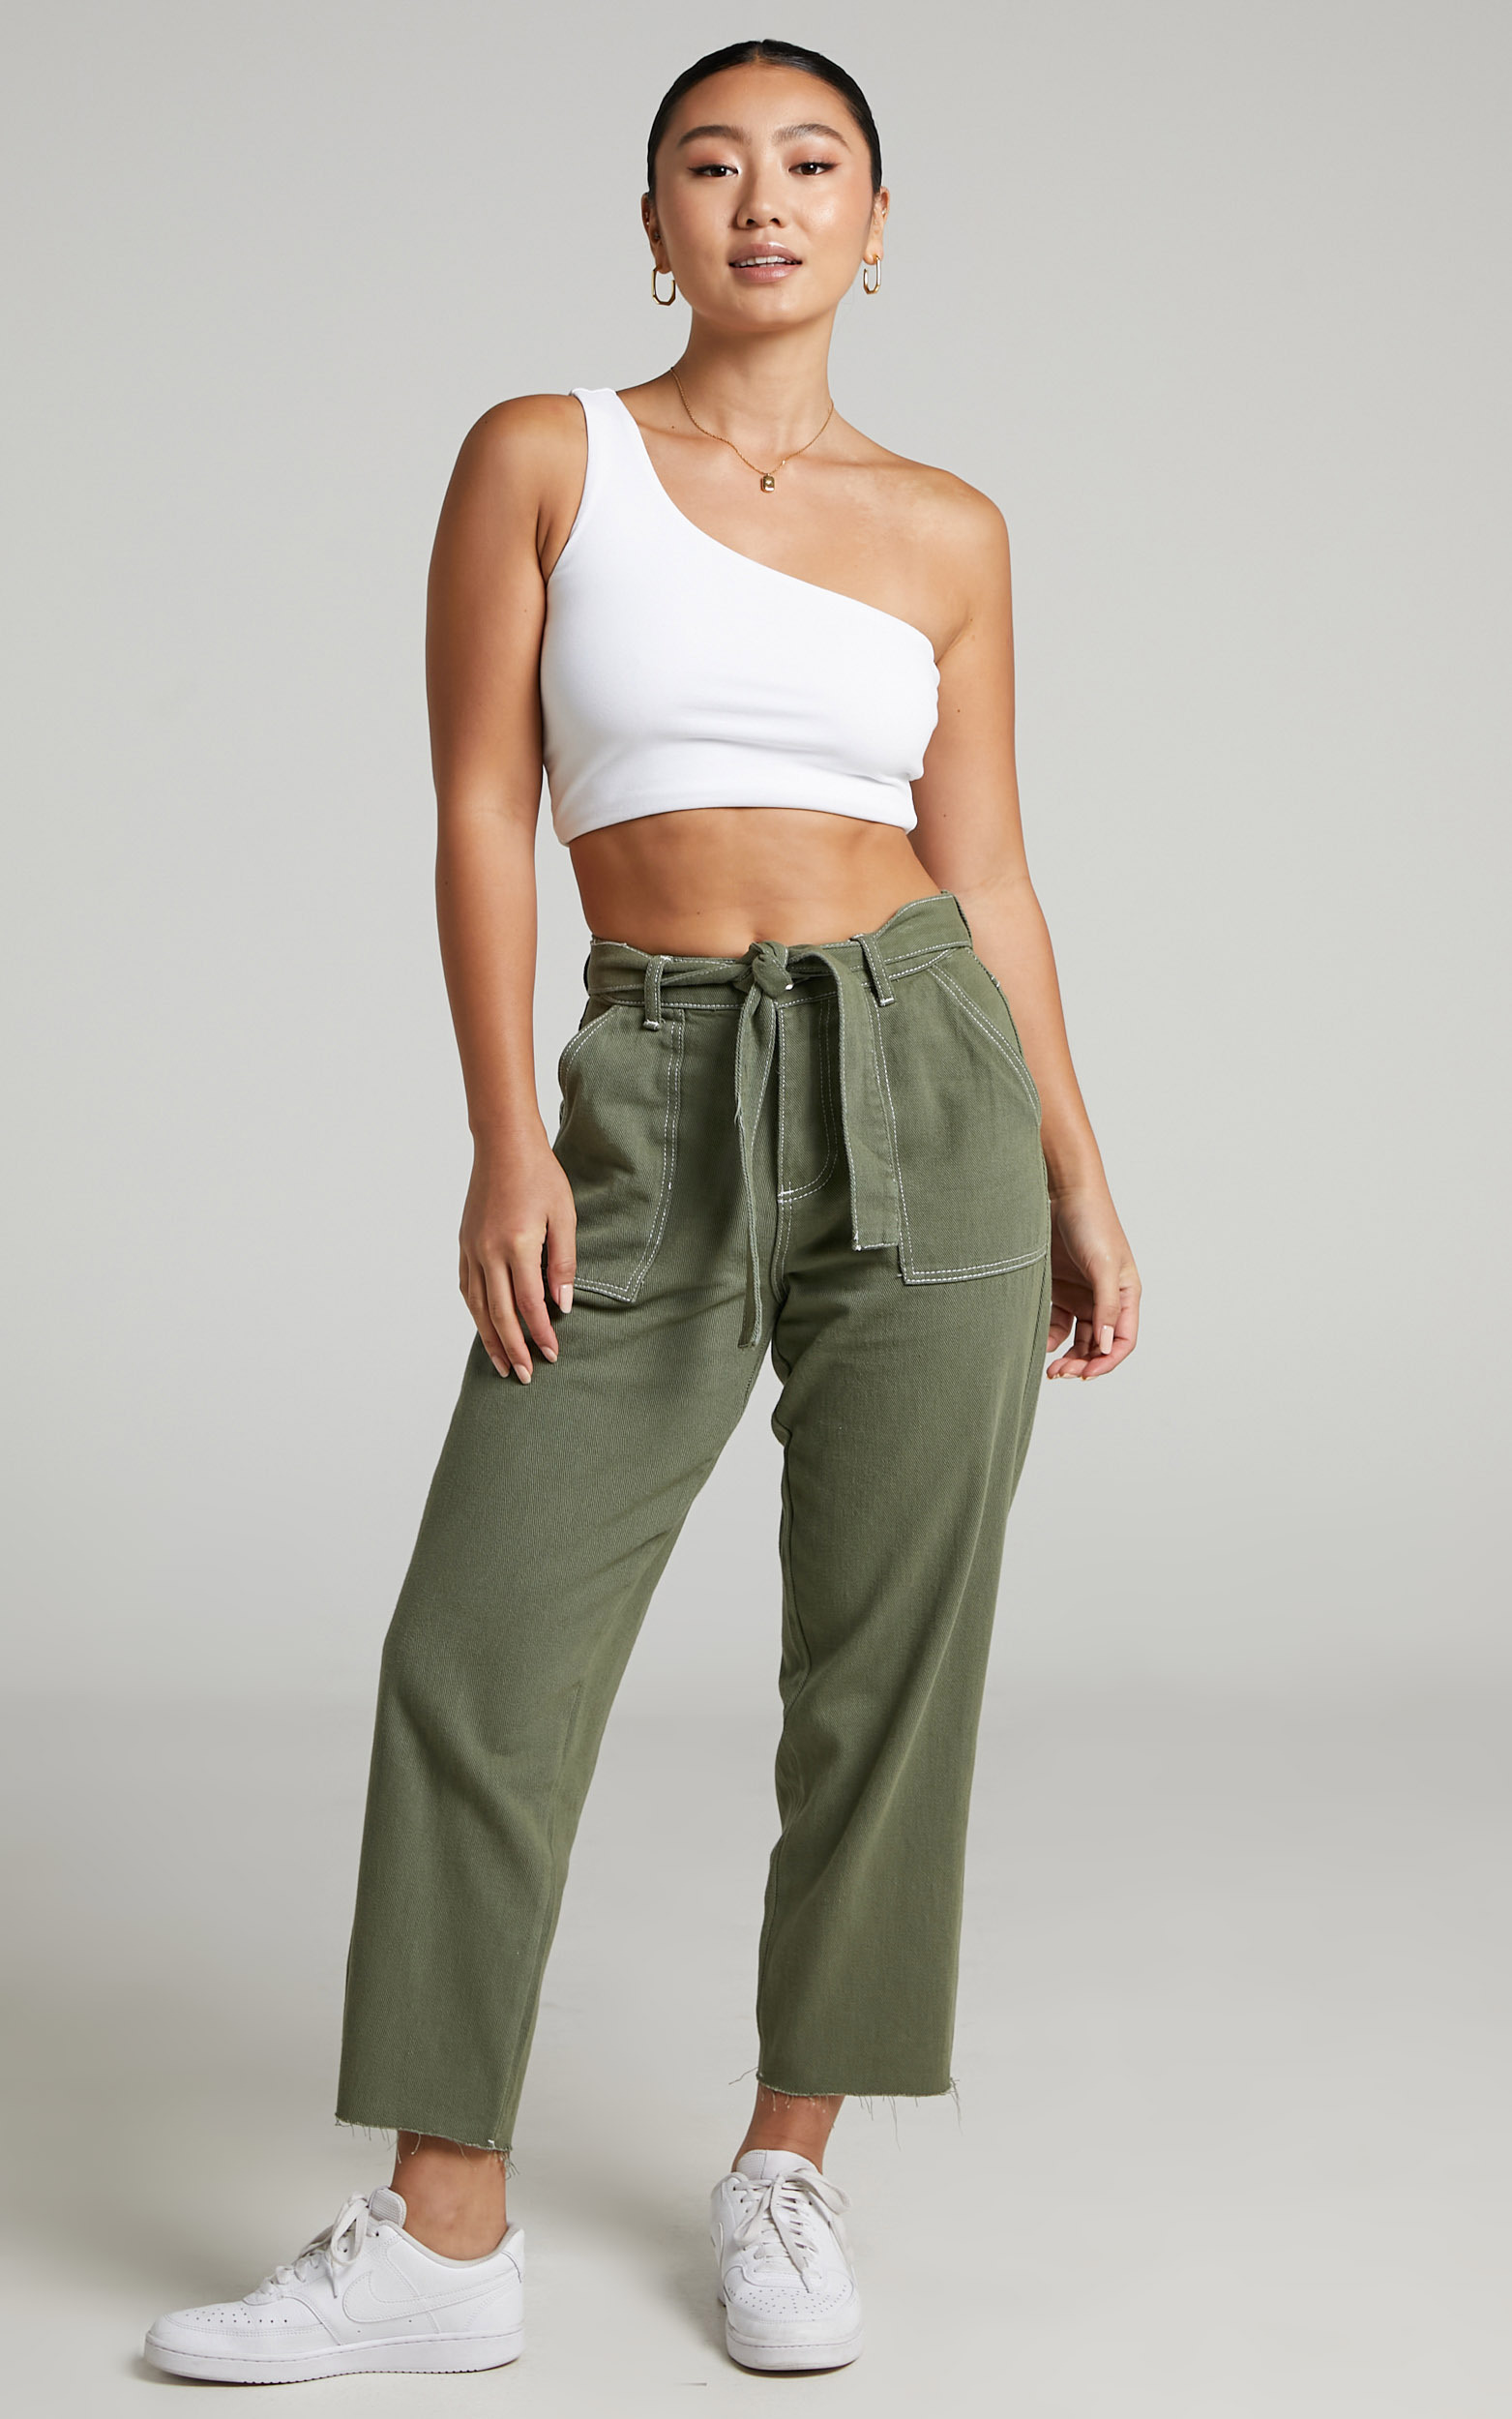 Leyton Tie Waist Jeans in Khaki - 06, GRN1, hi-res image number null